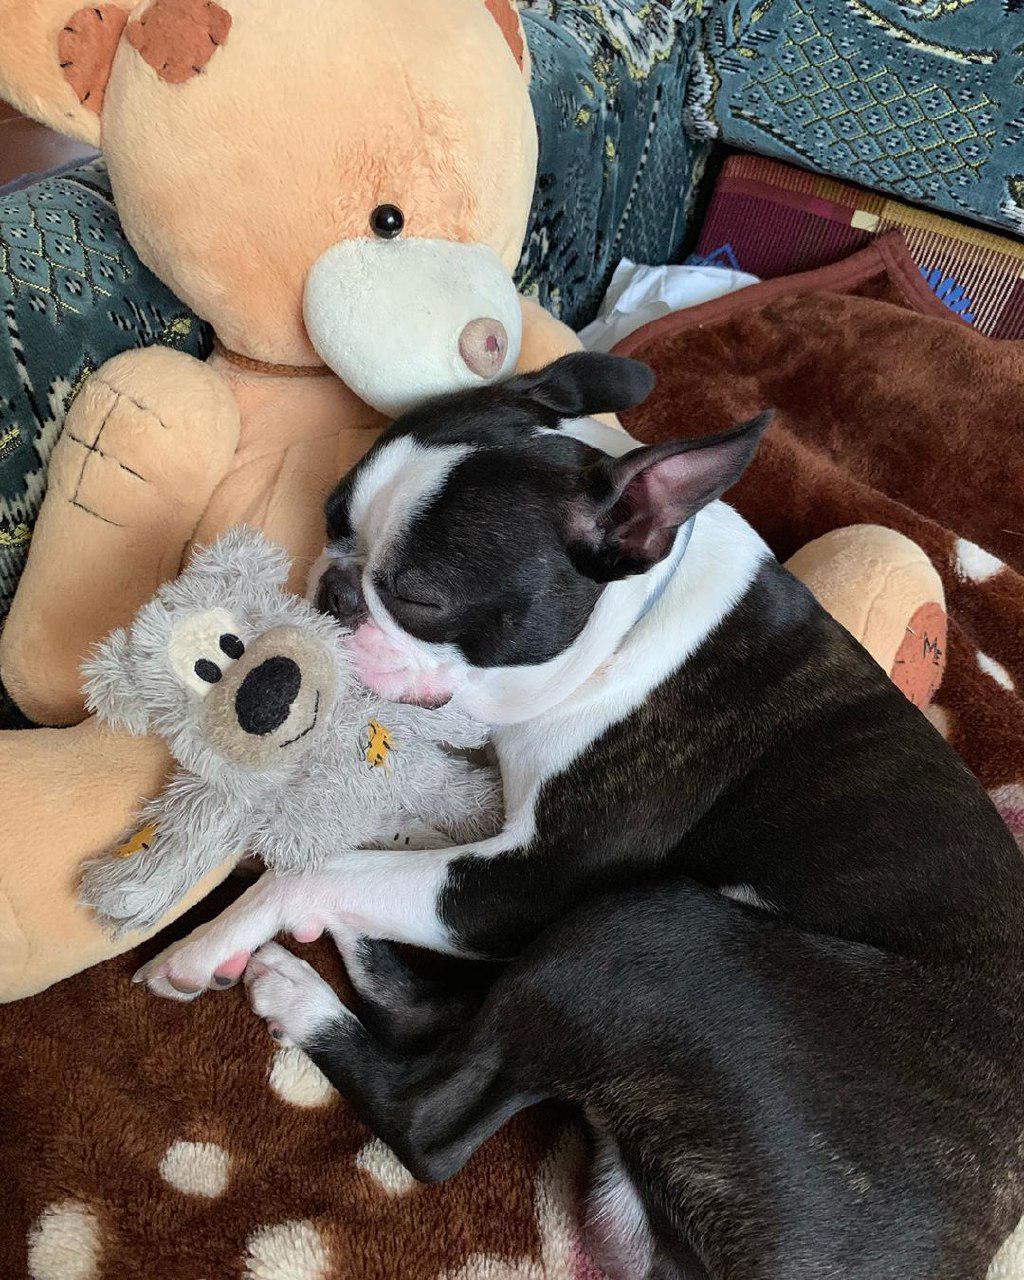 A Boston Terrier sleeping on its bed with its stuffed toys and a large teddy bear